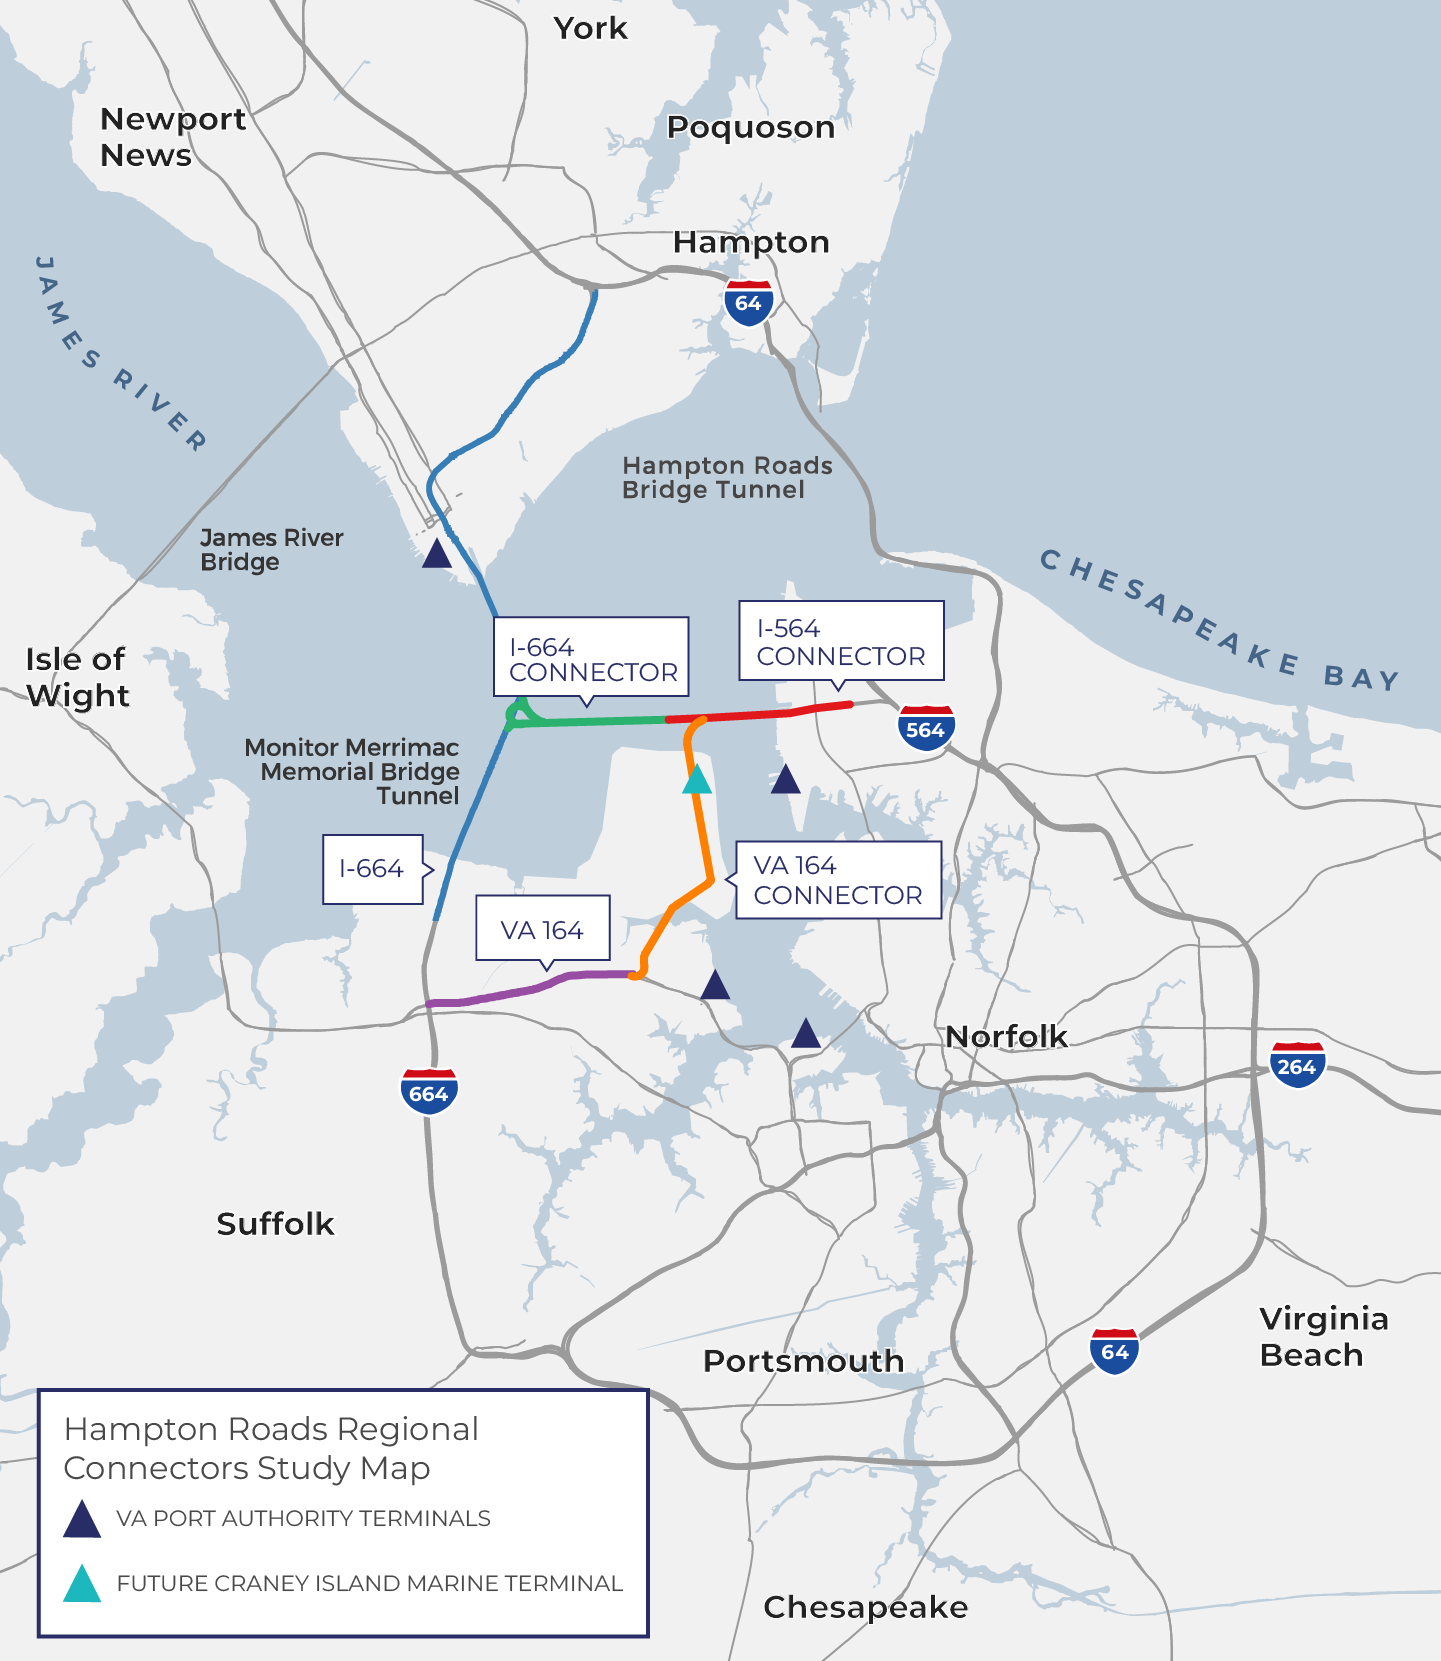 Map of the Norfolk region and road segments for solutions.